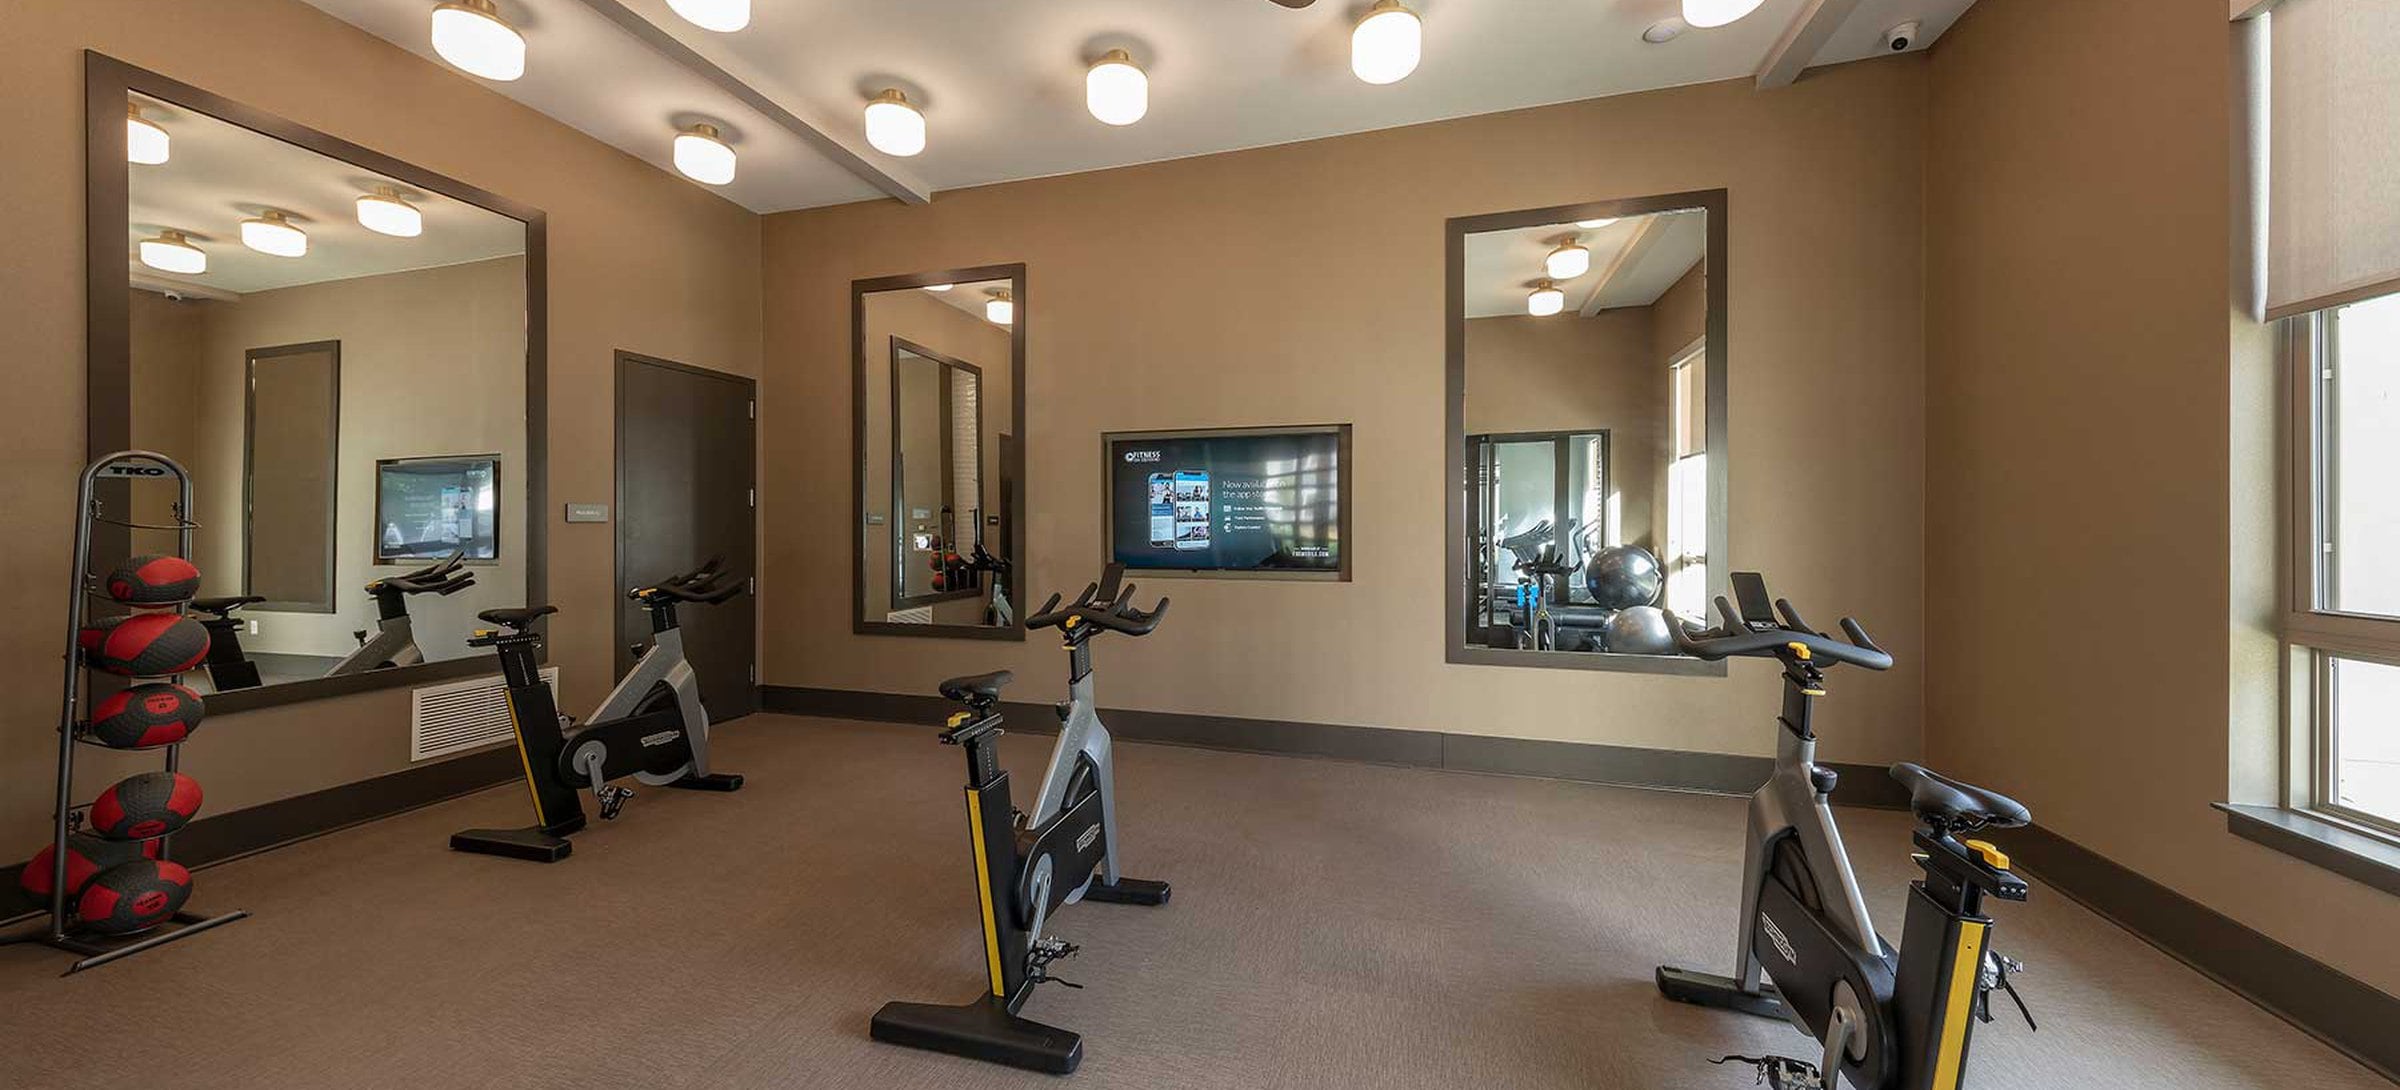 East building fitness studio with spin bikes and virtual fitness programming